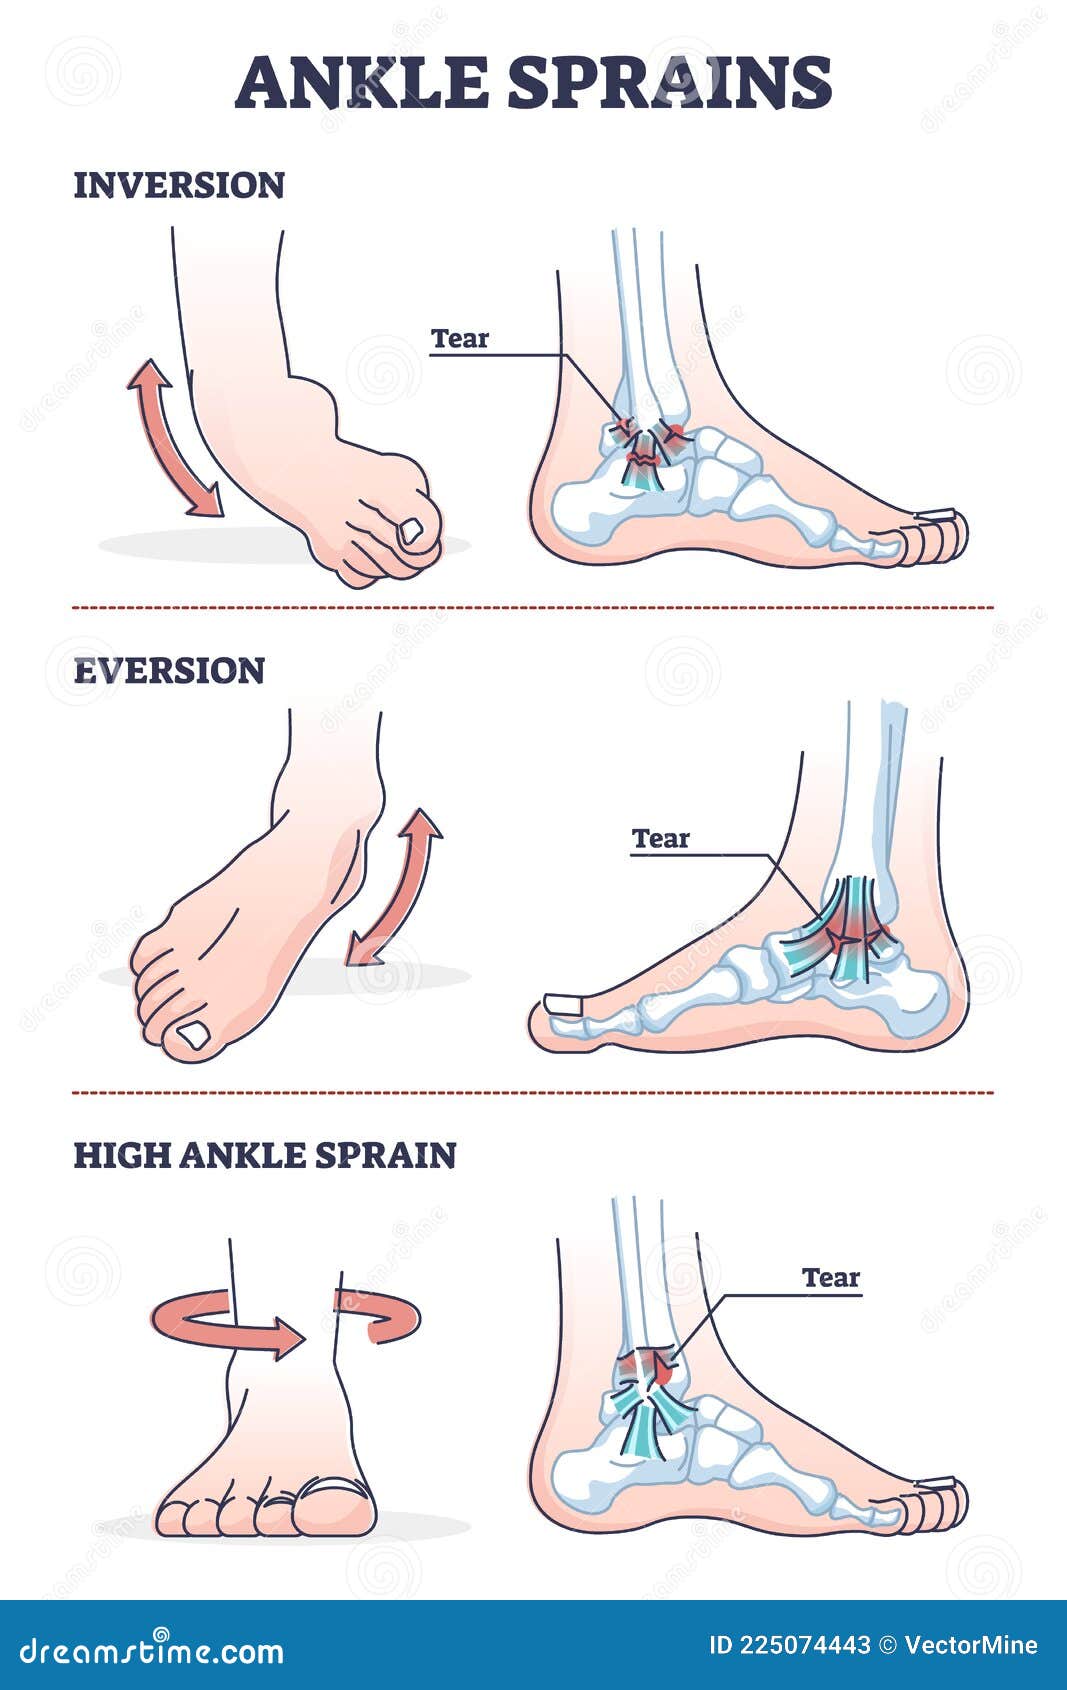 ankle sprains situations with inversion and eversion injury outline diagram